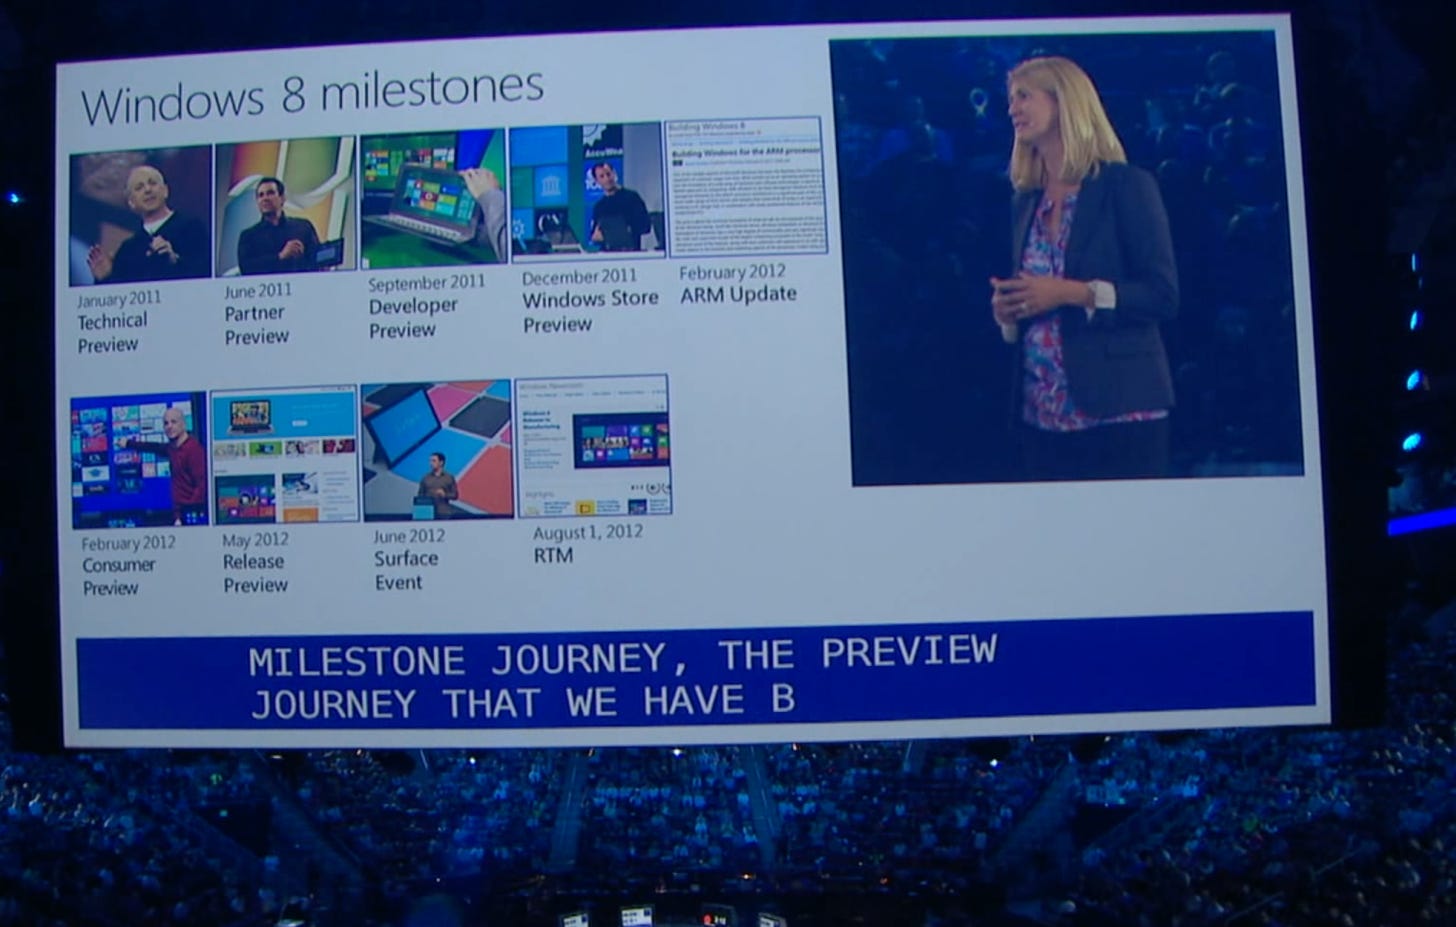 The Milestones listed in the slide are the public ones and include: Tech preview (jan 2011), Partner Preview (6/2011), Developer preview (9/2011), Windows Store Preview (12/2011), ARM Update (2/2012), Consumer Preview (2/2012), Release Preview (5/2012), Surface Event (6/12), RTM 8/1/2012)